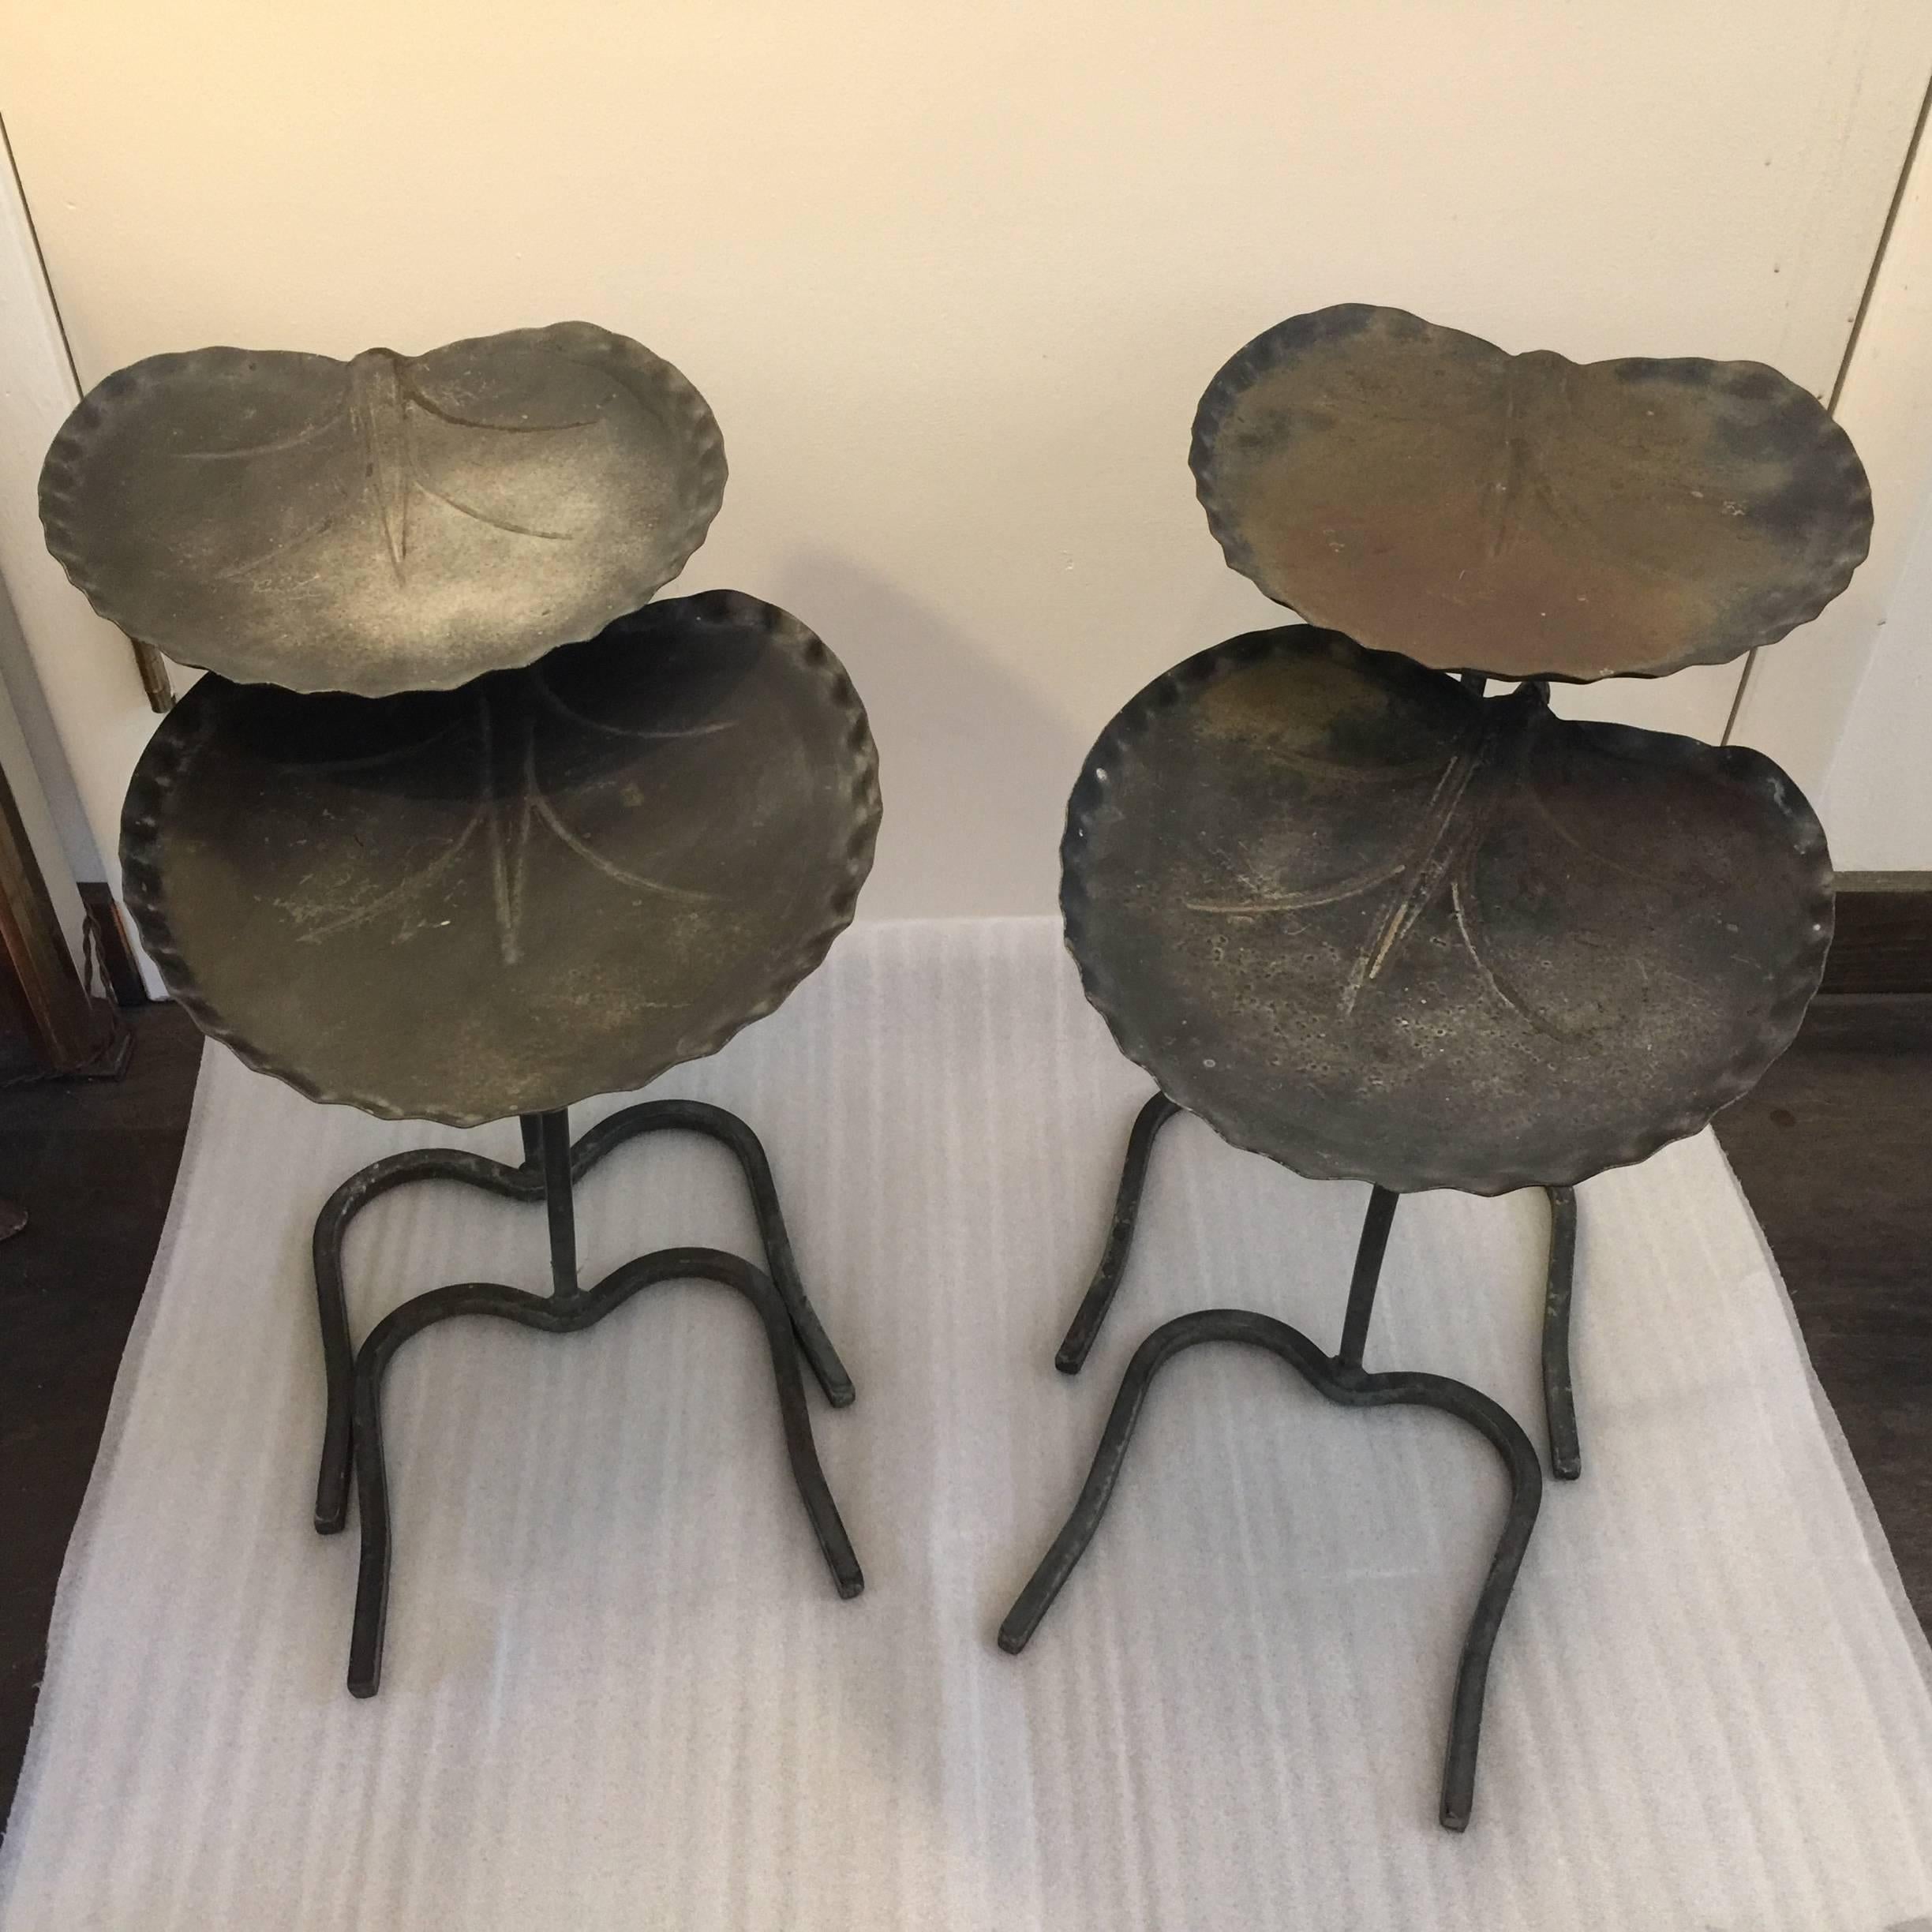 Lovely aged and worn to perfection nesting tables by Salterini, famed garden furniture designer. Each set nests perfectly and these are two sets available.

Measure: Taller table 20.5 inches tall, 12.5 inches diameter
Lower table 18.5 inches